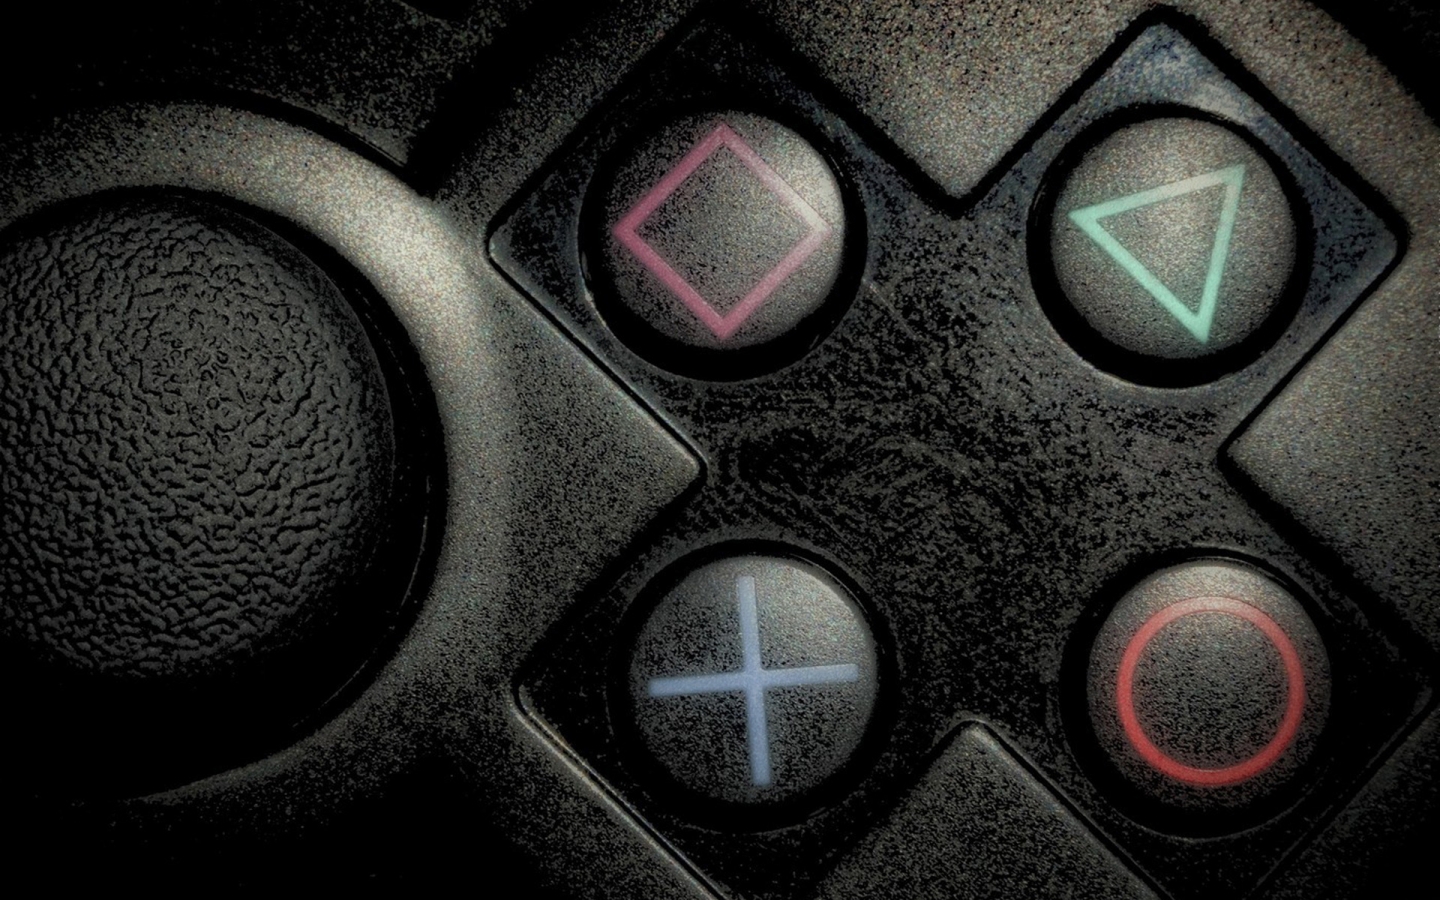 Playstation Buttons for 1440 x 900 widescreen resolution